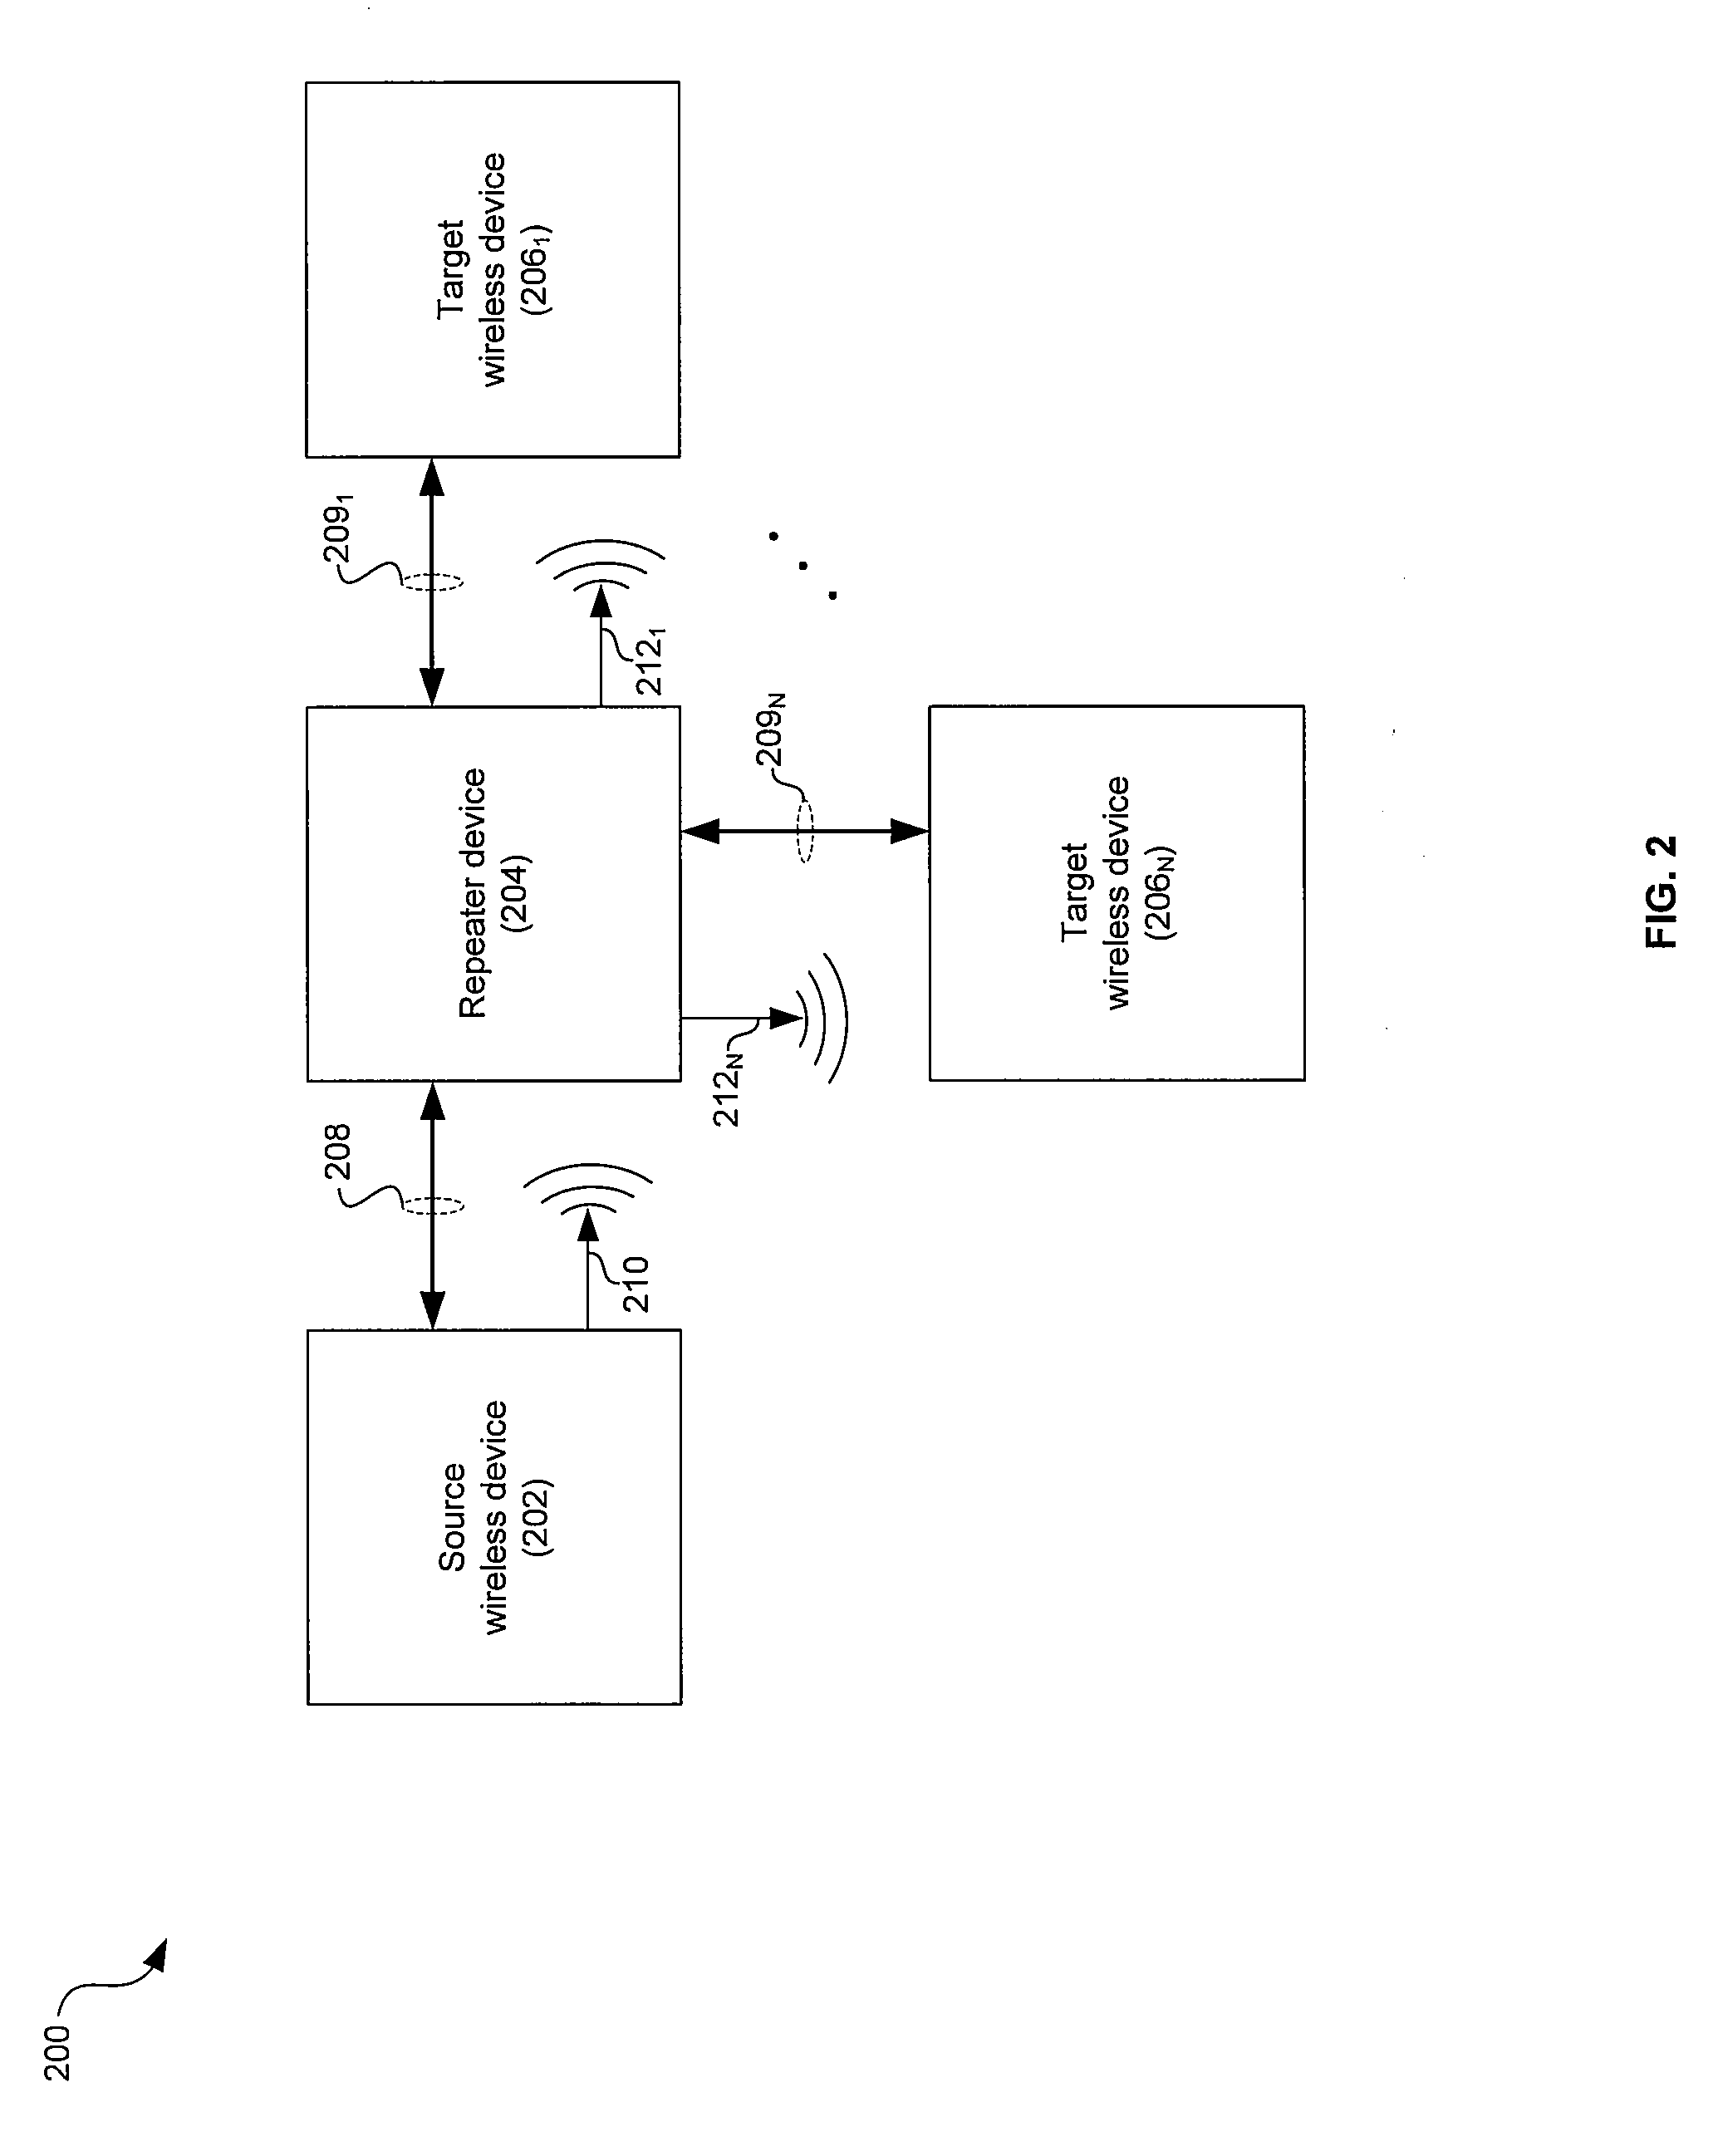 Method And System For Communicating Via A Spatial Multilink Repeater